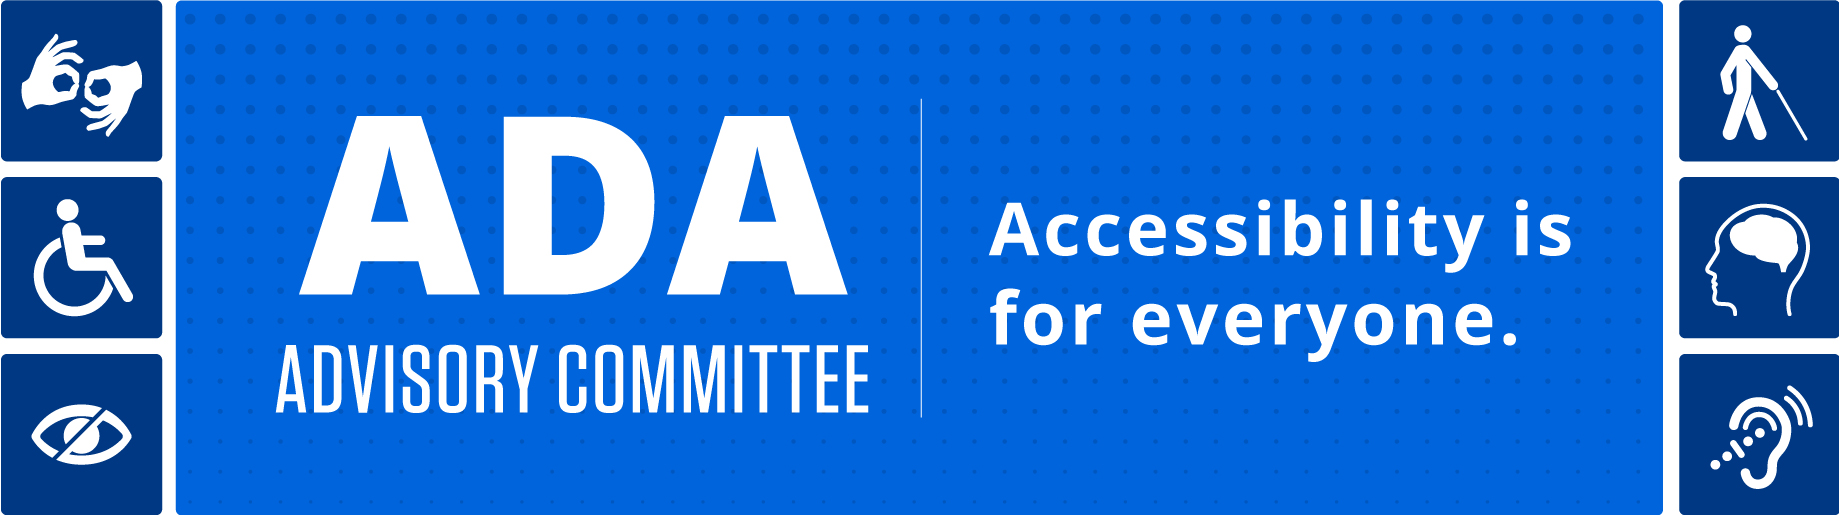 ADA Advisory Committee - Accessibility is for Everyone